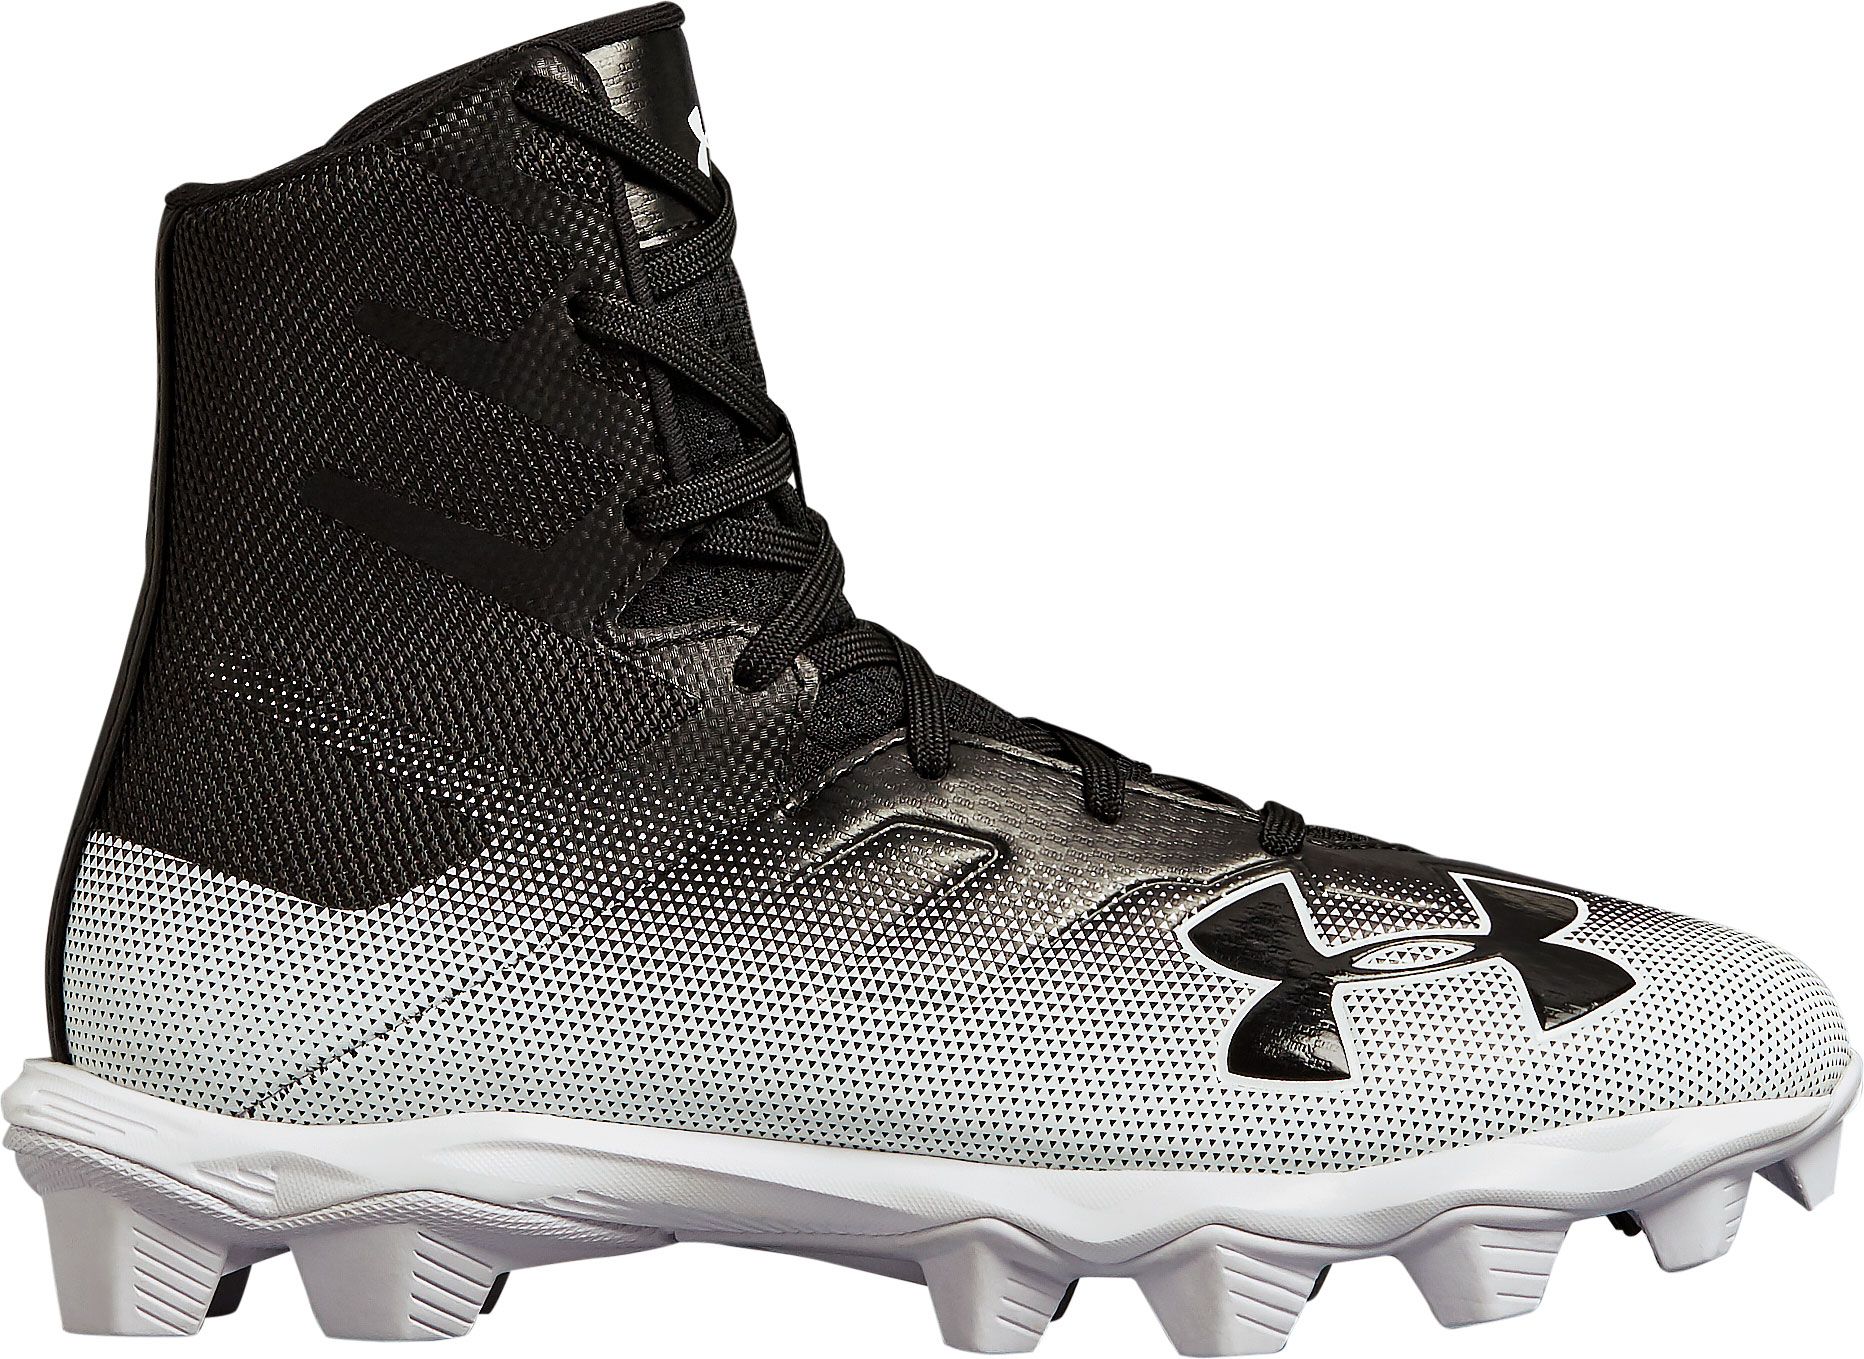 new under armour football cleats